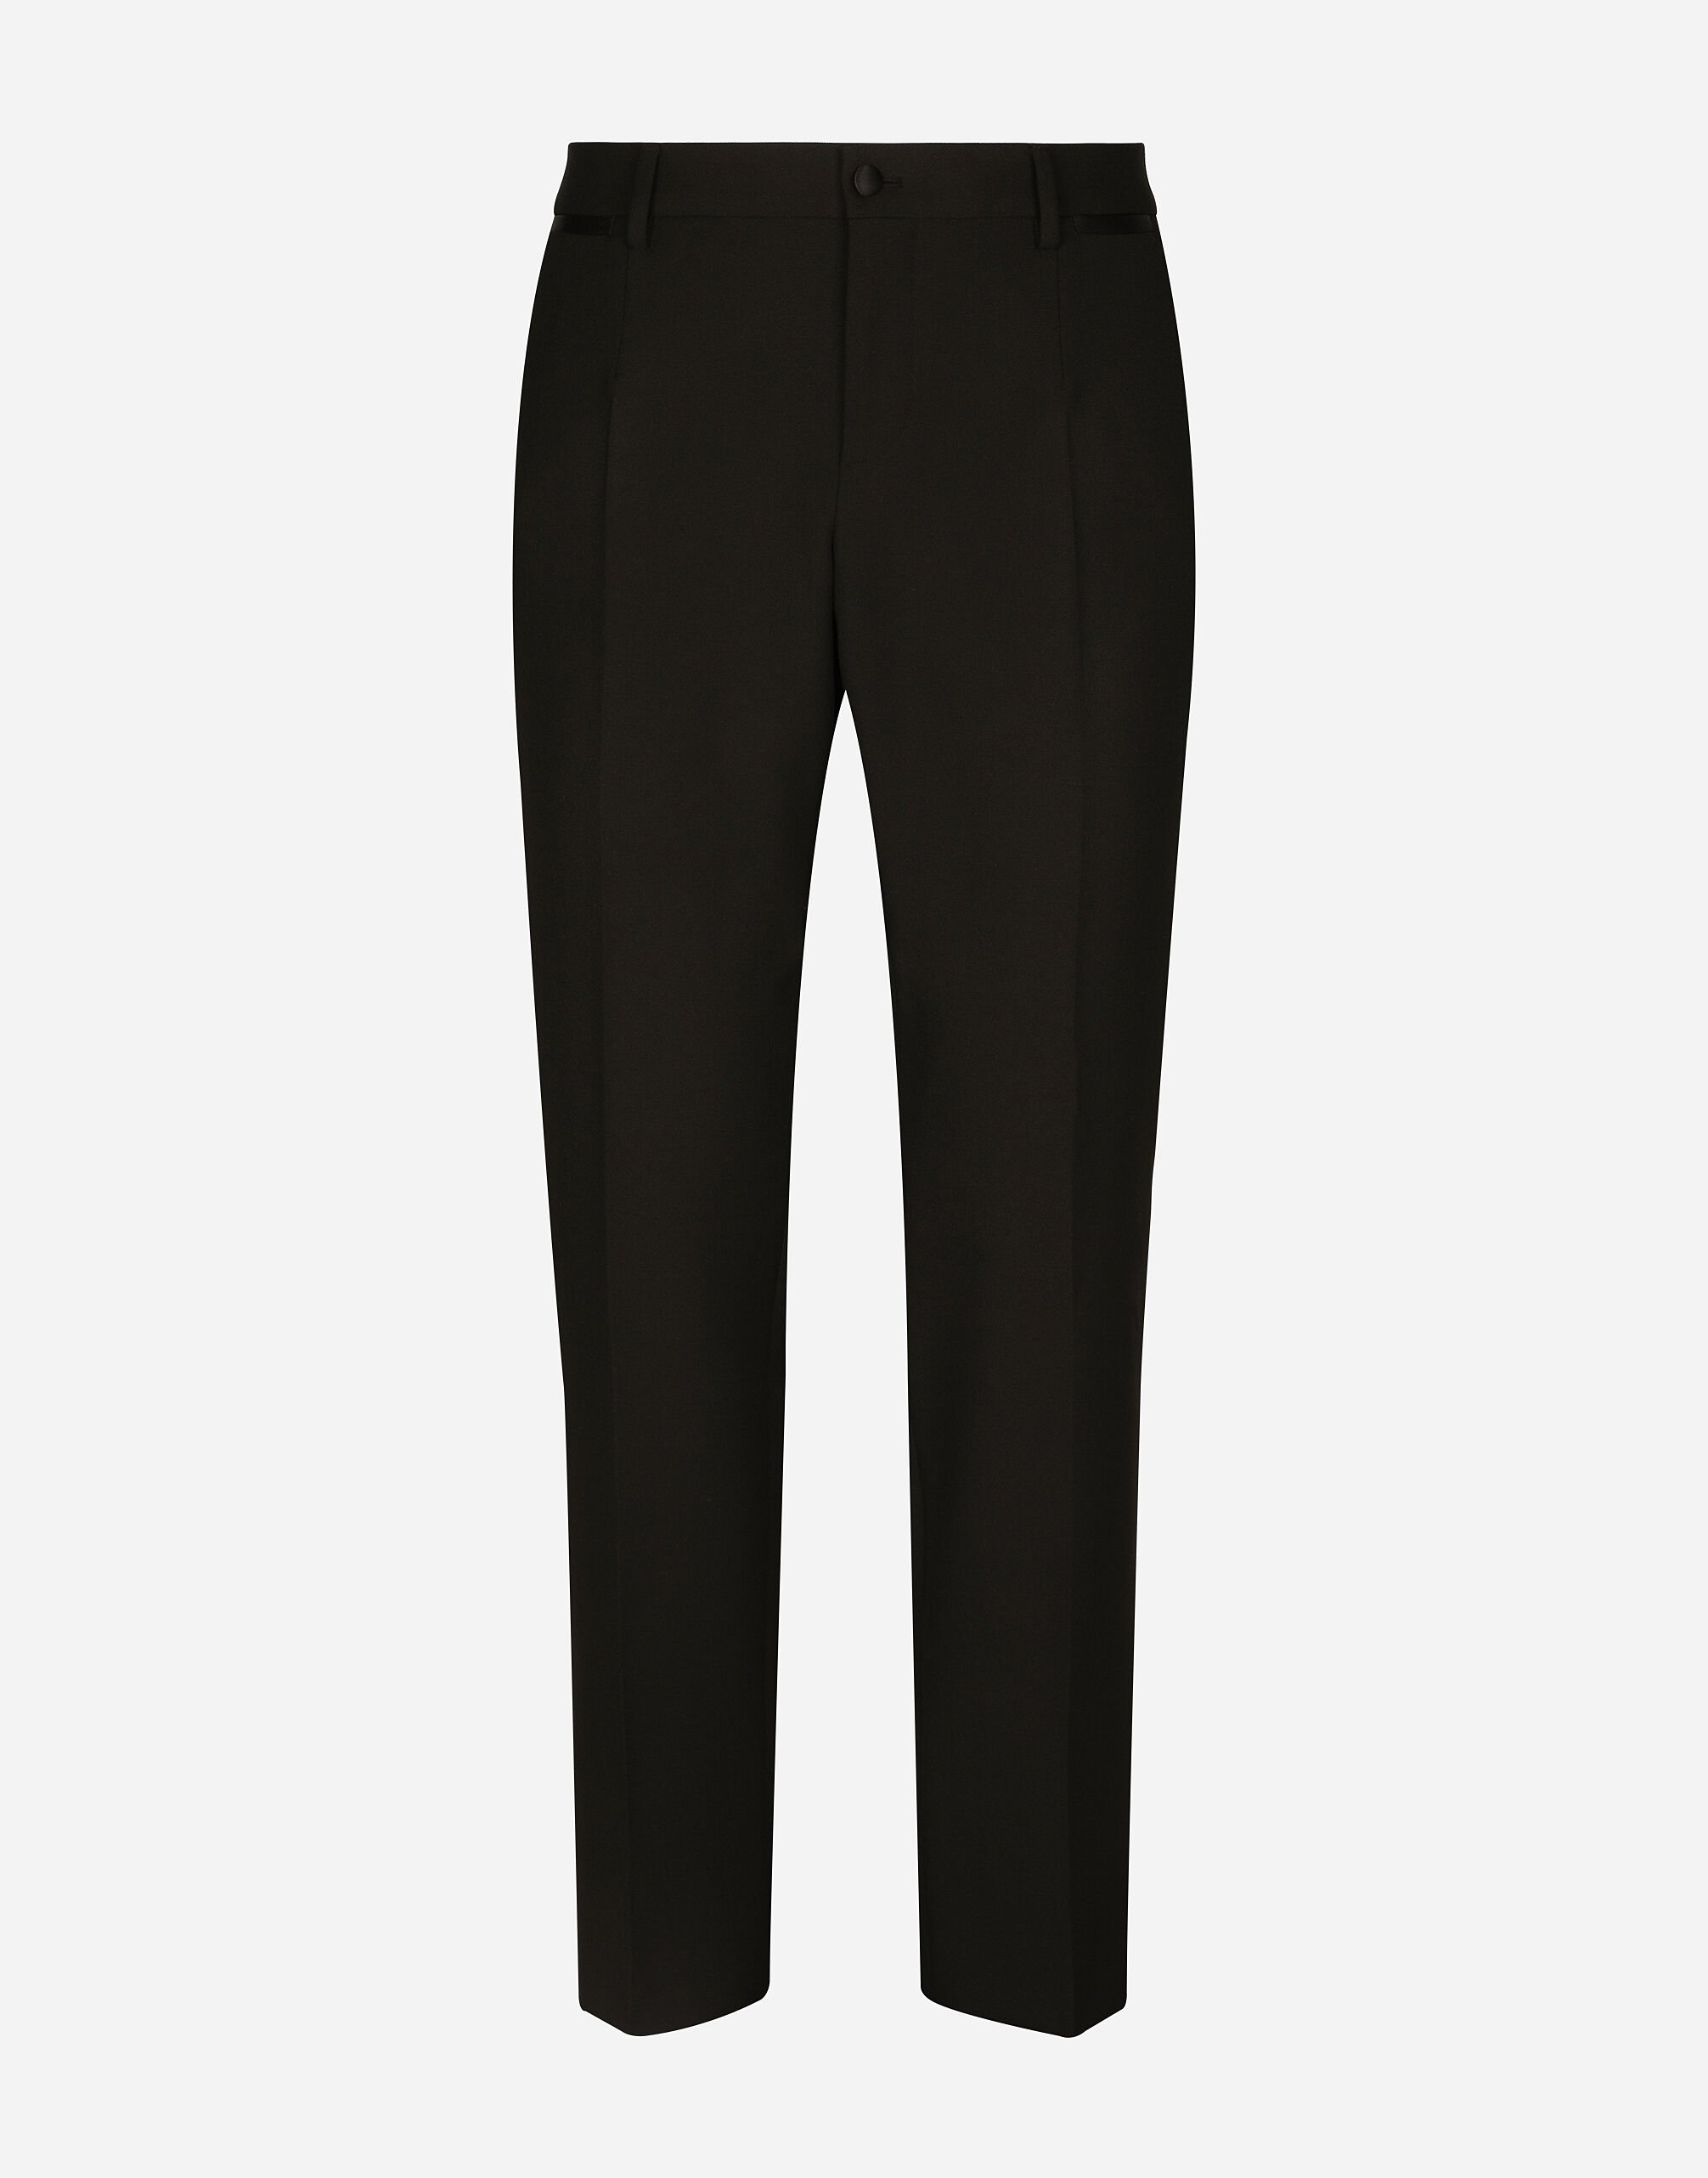 Dolce & Gabbana Tailored stretch wool tuxedo pants 블랙 G2PS2THJMOW